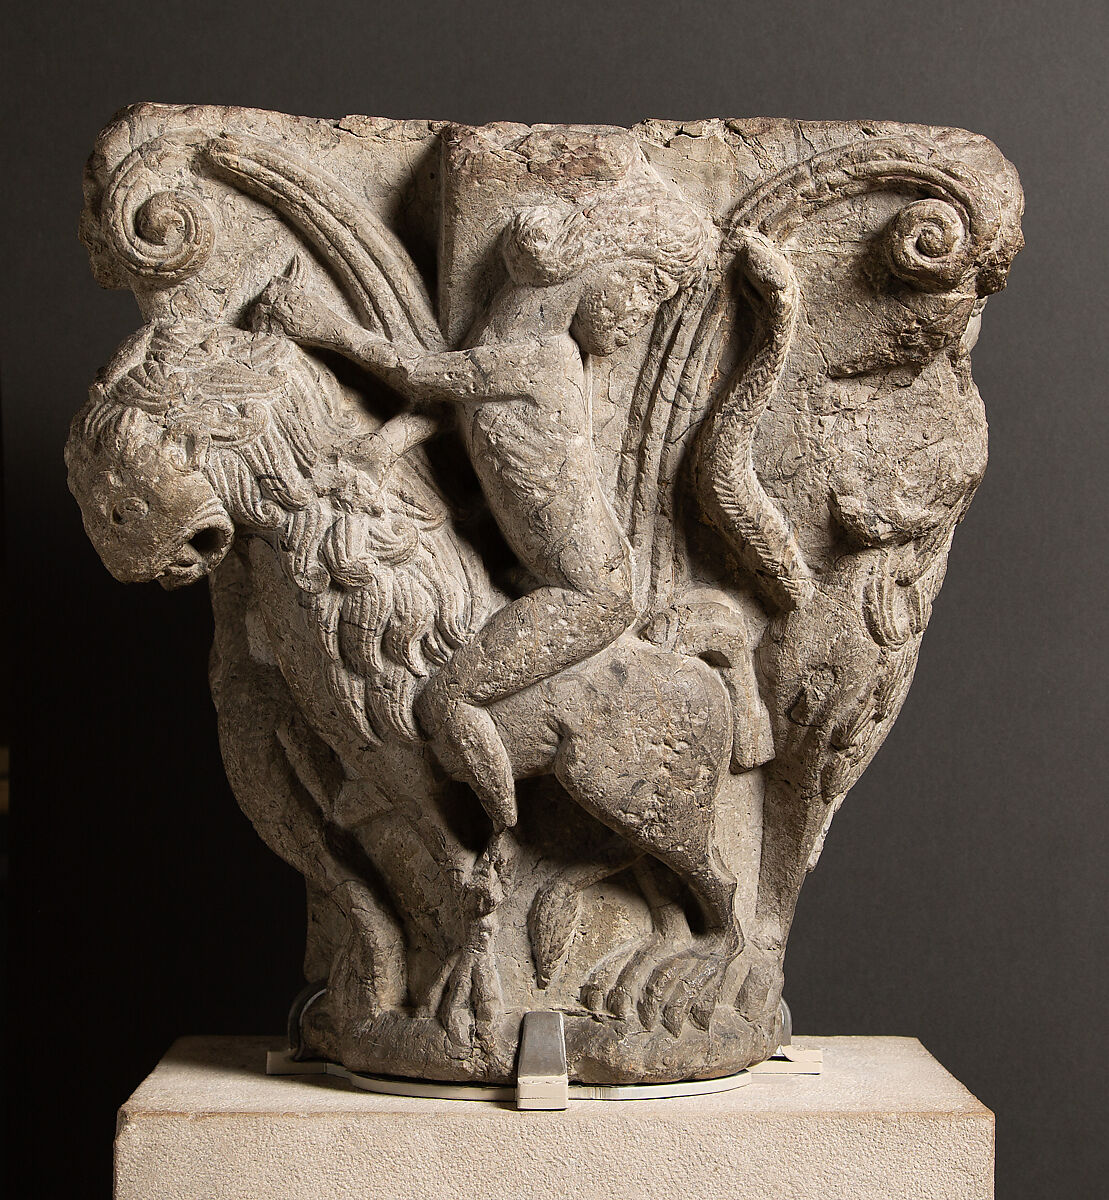 Capital with Lions Mounted by Nude Riders, Stone, North Spanish or South French